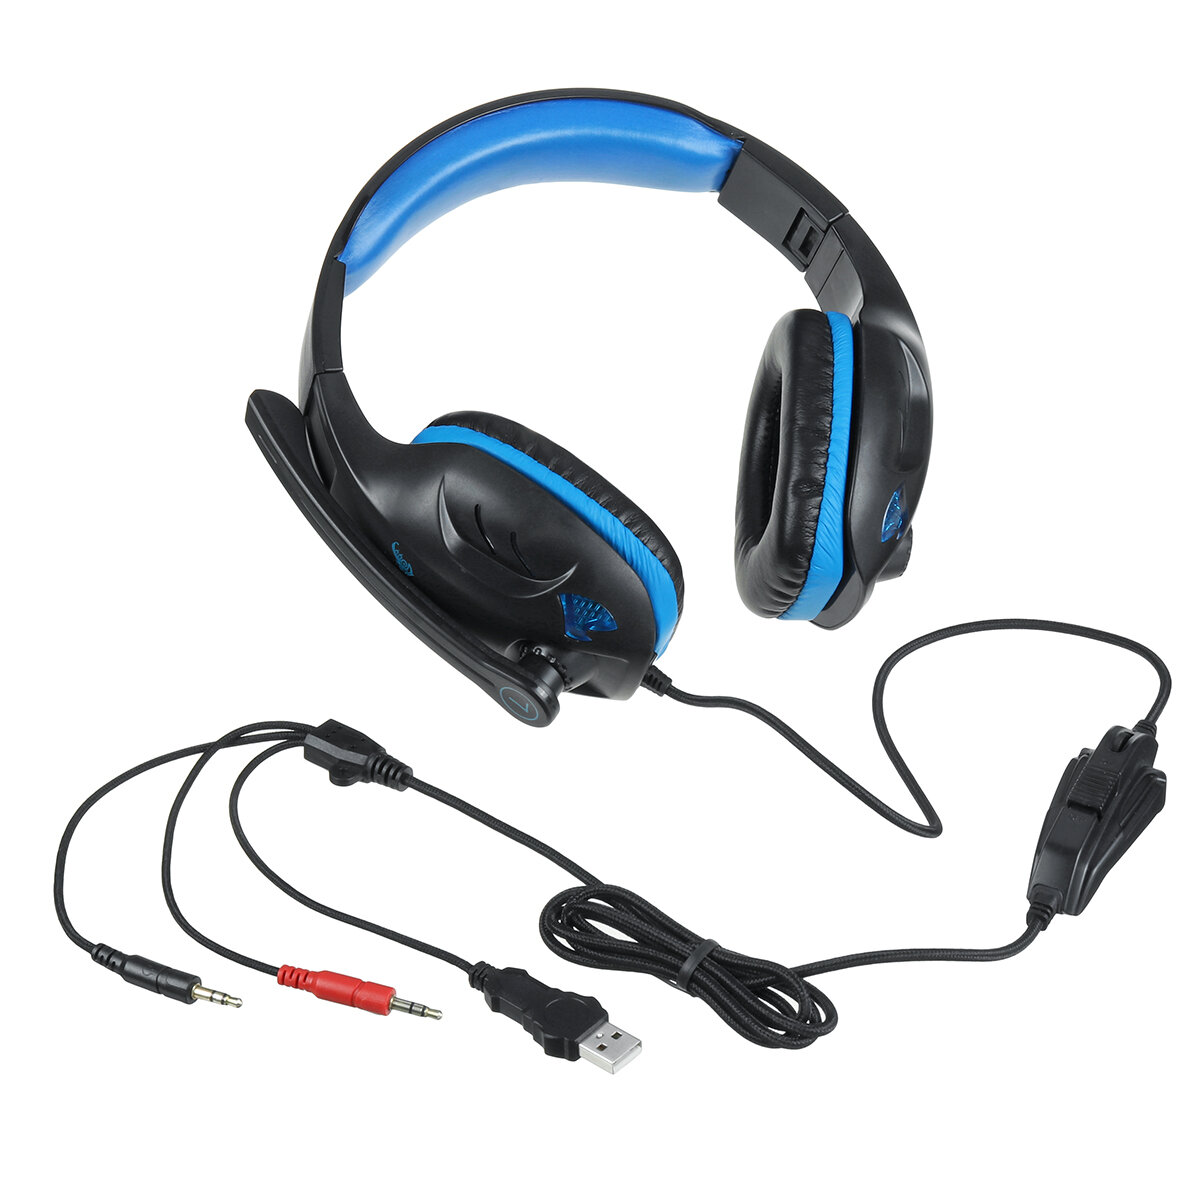 IN-968 3.5mm Gaming Headset Headphone LED Surround Sound MIC For PC Laptop PS4 Xbox